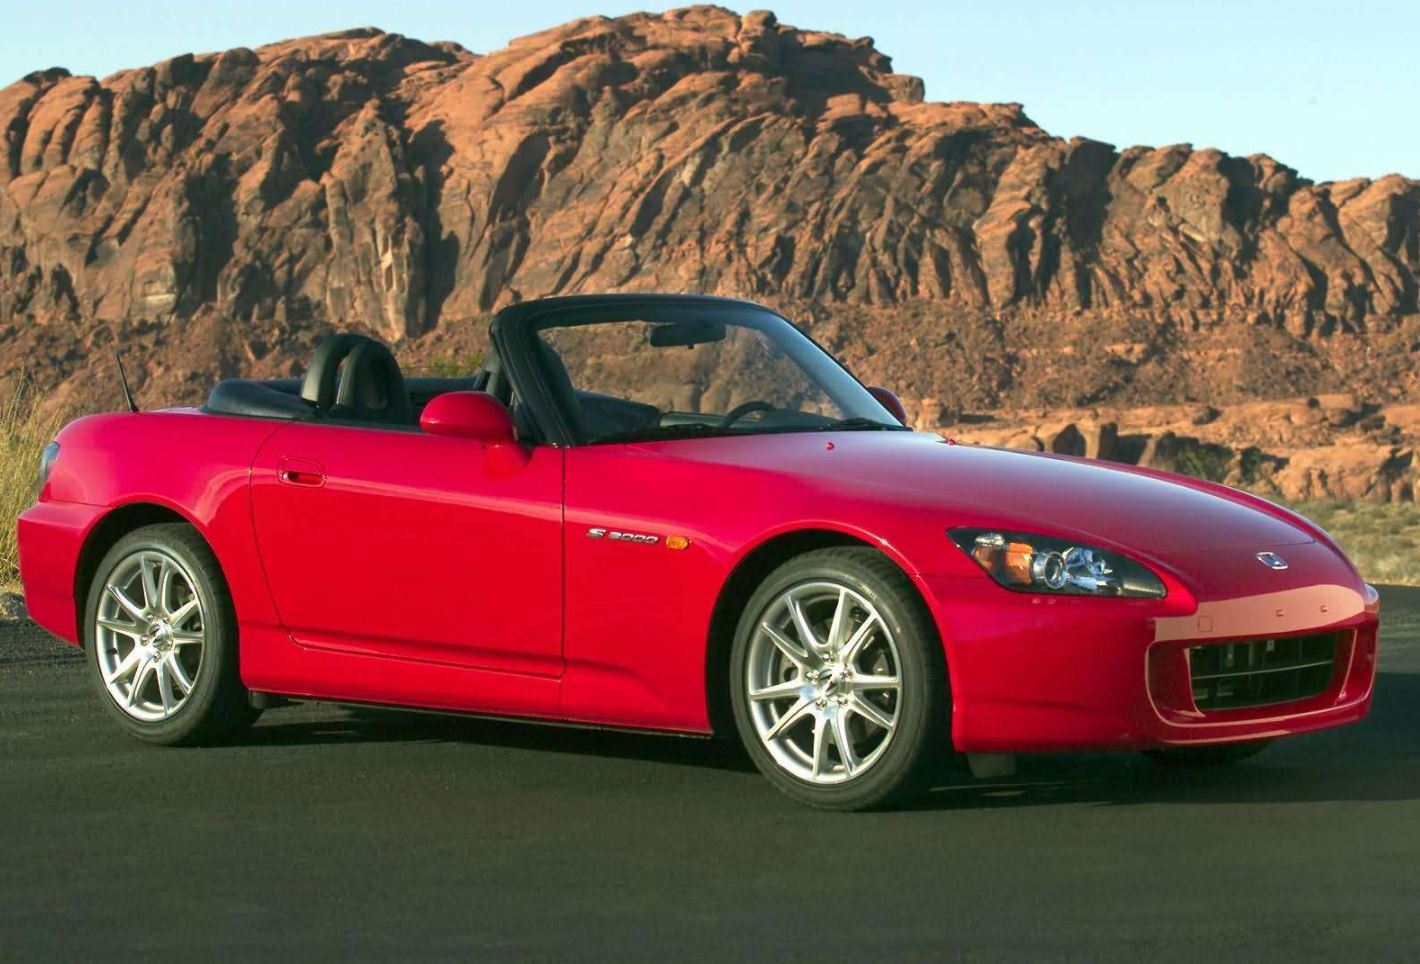 How Much Did the Honda S2000 Cost New? Garage Dreams